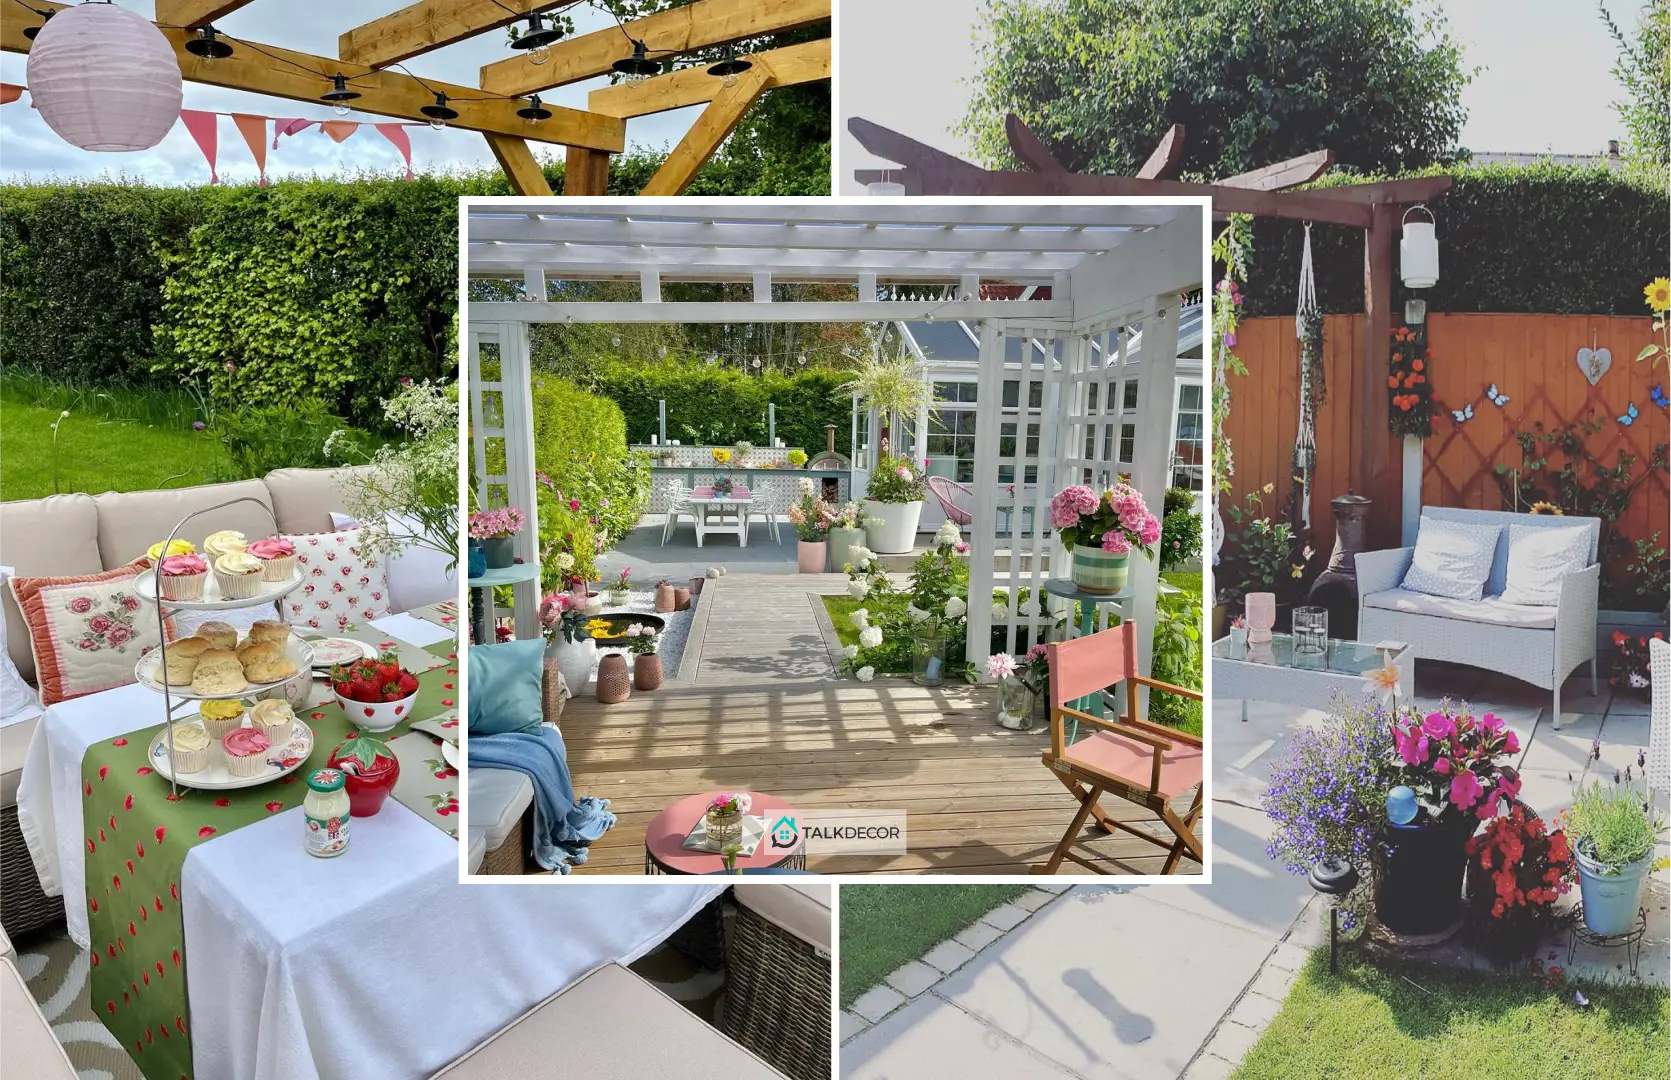 How to Provide Comfortable Pergola this Summer